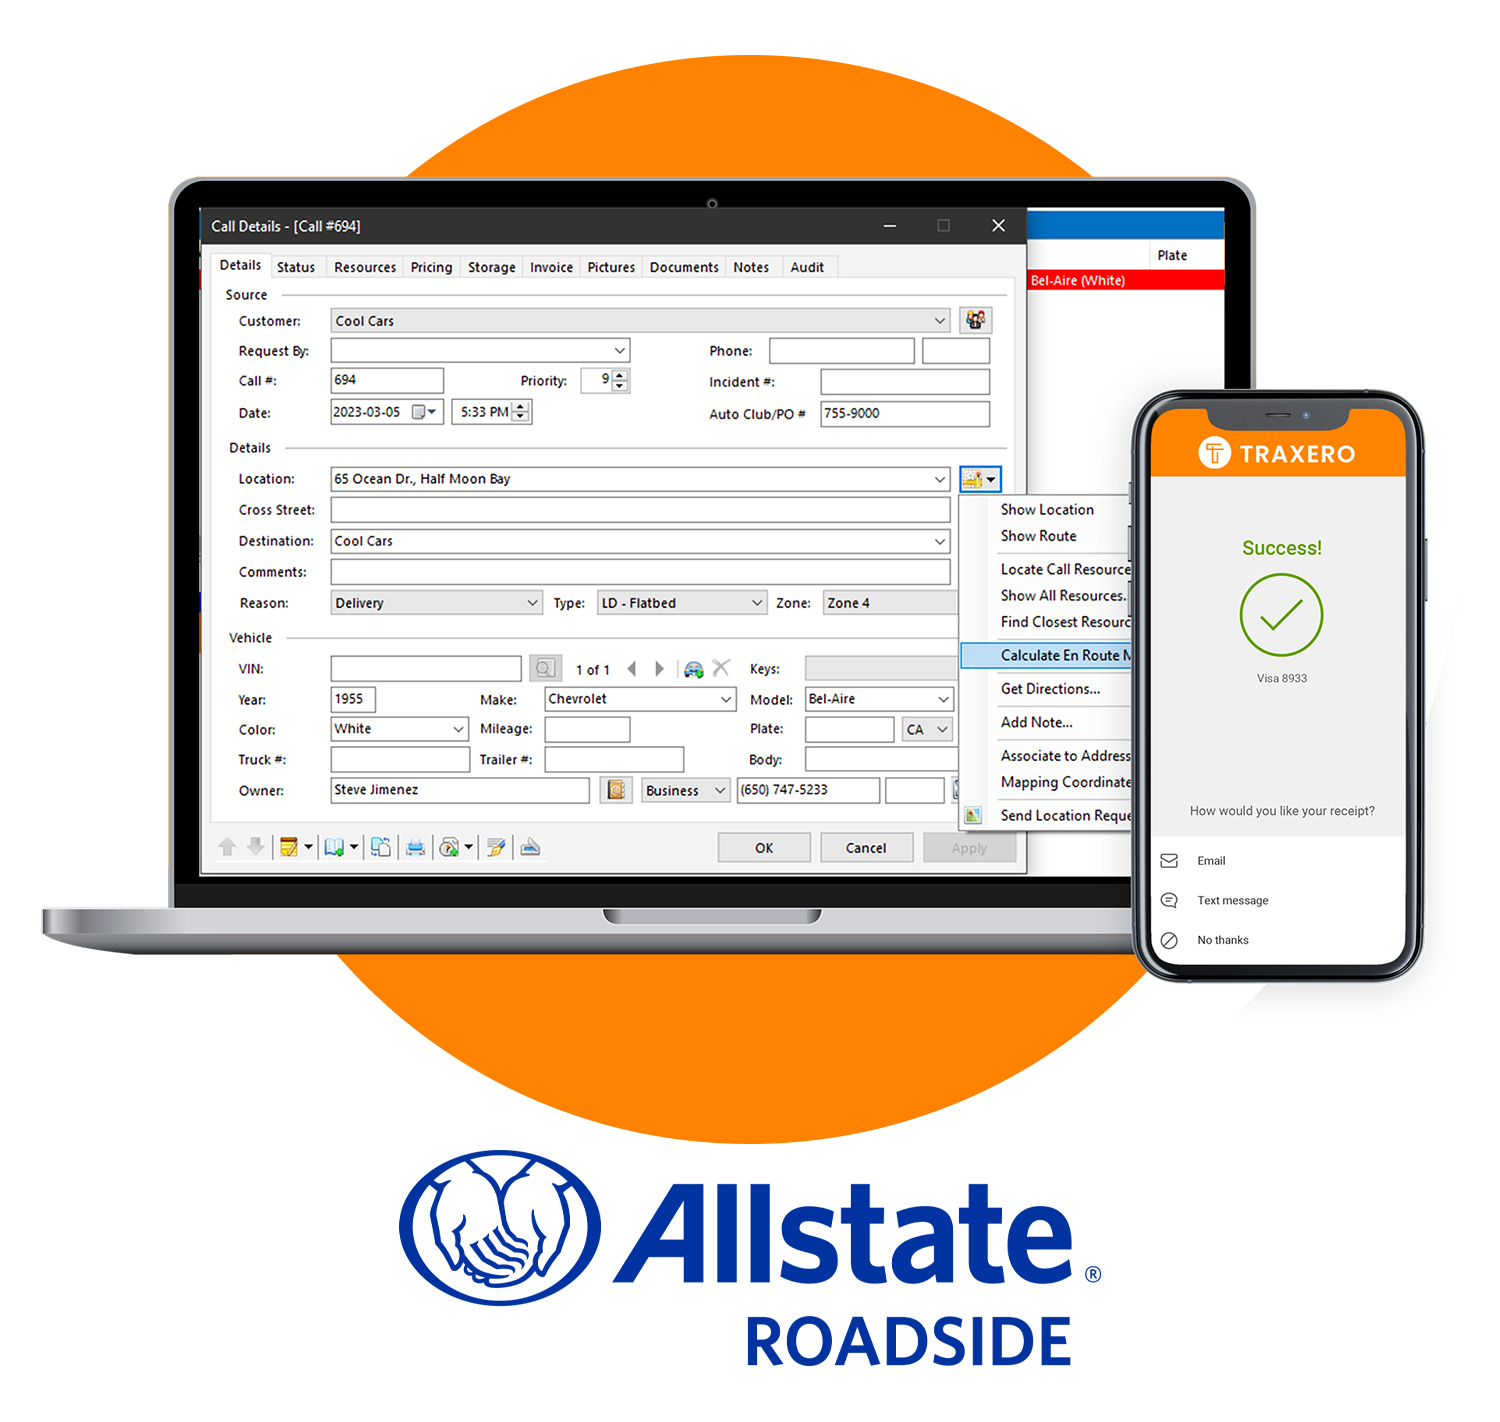 Towing Management and Digital Dispatch Software screens on devices and the Allstate Roadside logo